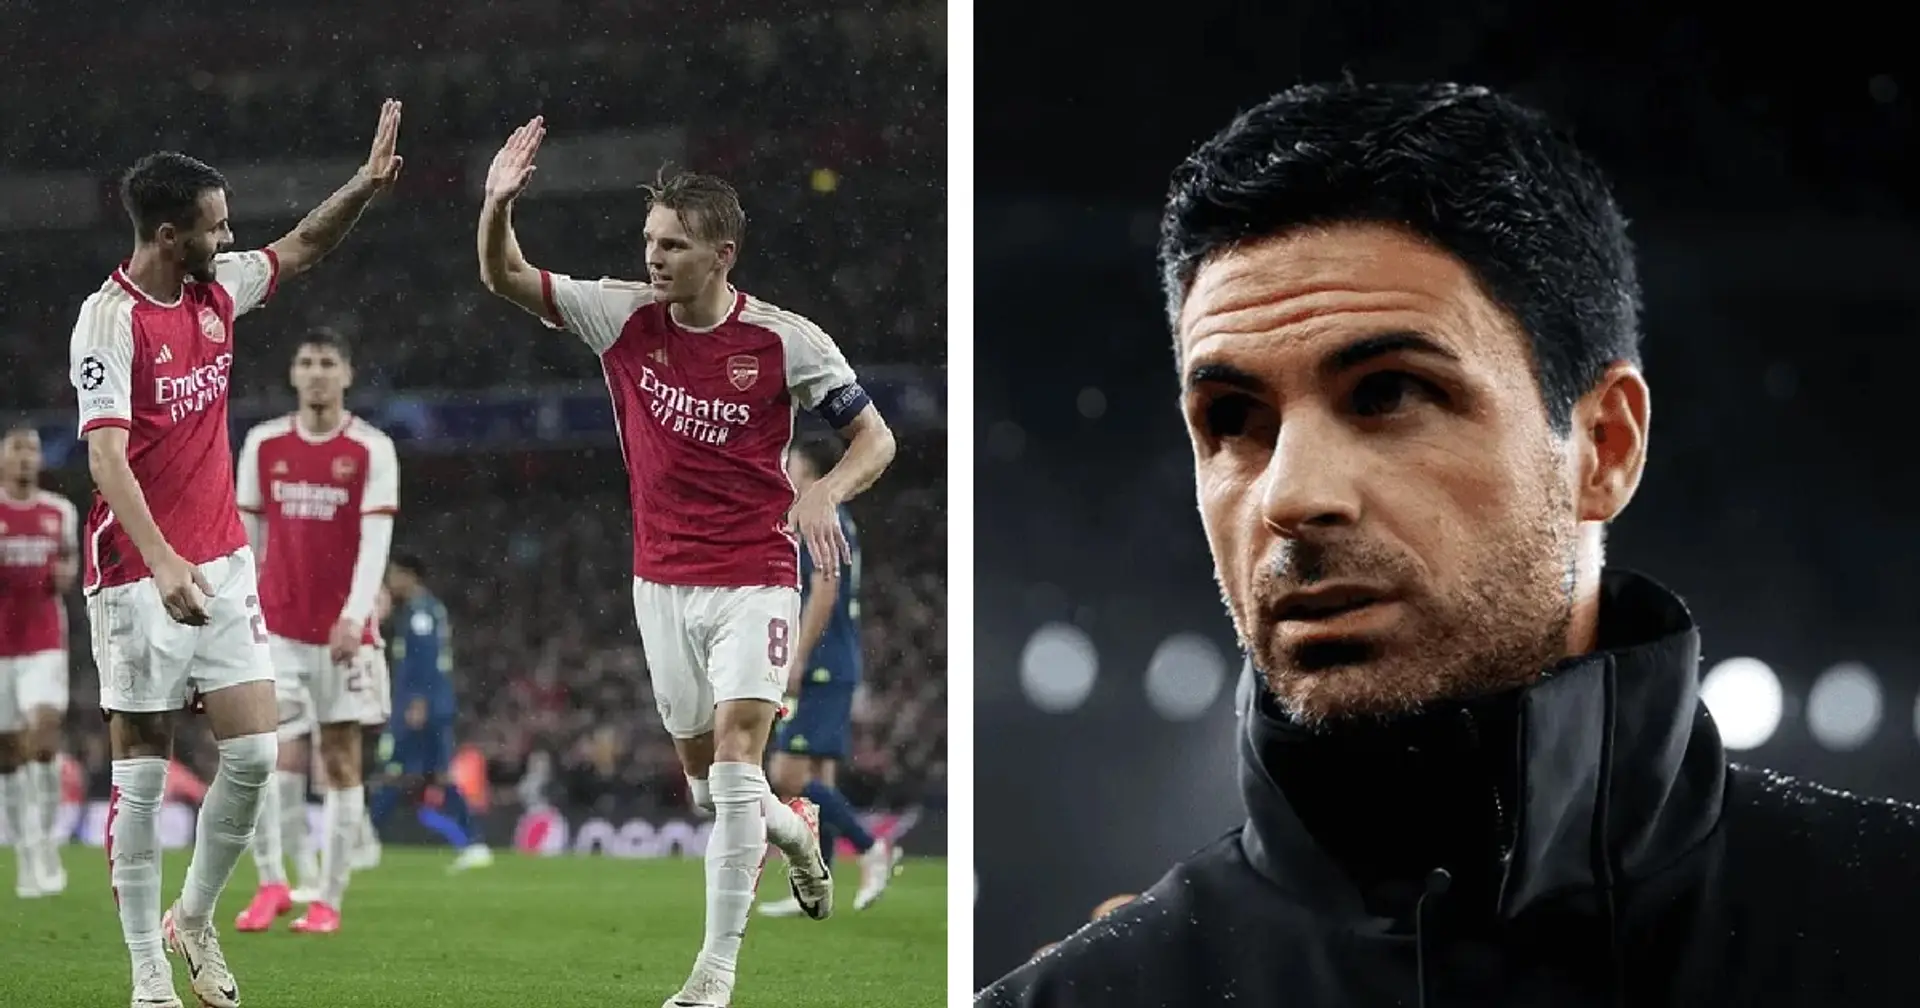 Mikel Arteta reveals ONE moment Arsenal fans made him emotional in PSV win